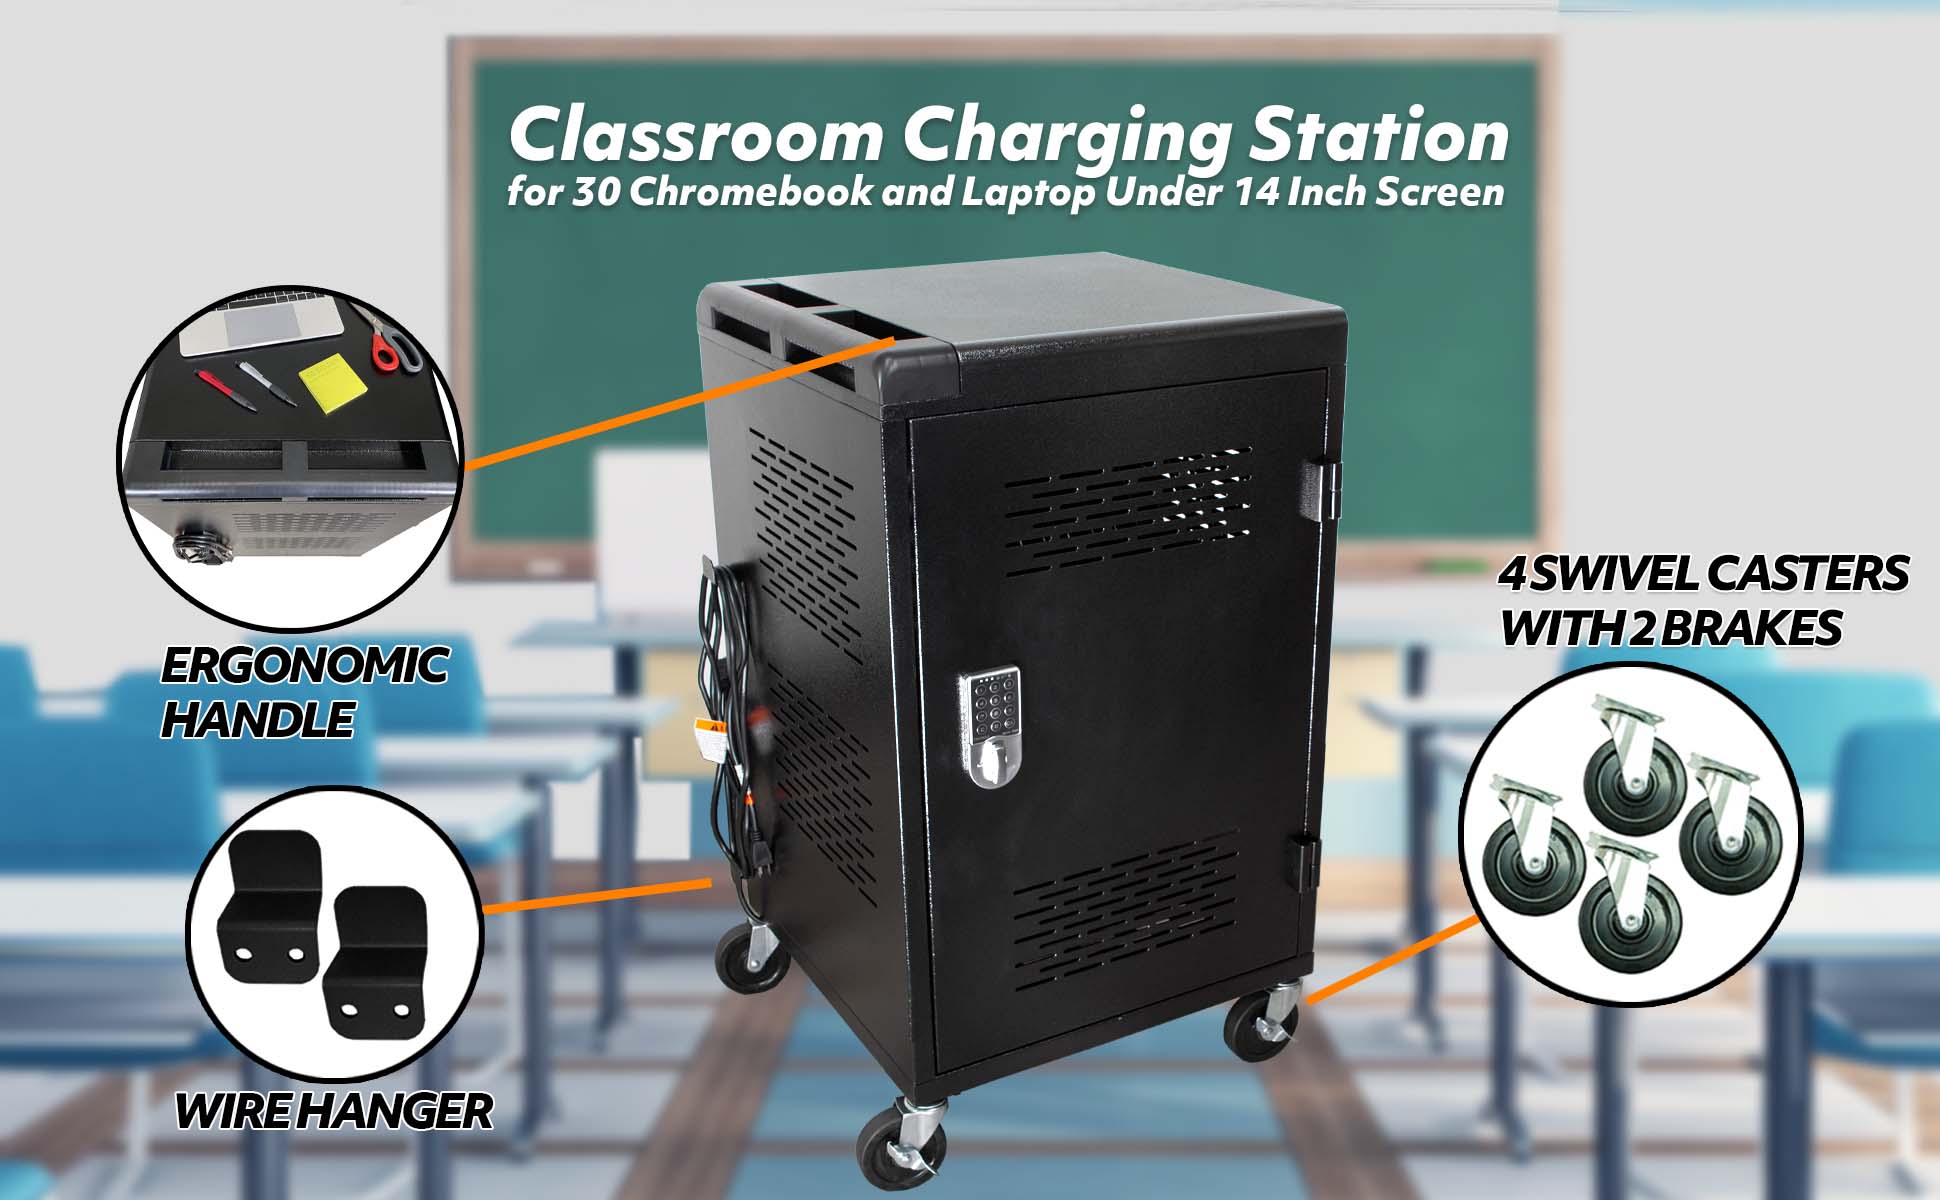 POCHAR-C30CH-30-Device-Charging-Cart-For-Chromebook-and-iPad-Chrombook-Charging-Cart-for-Classroom